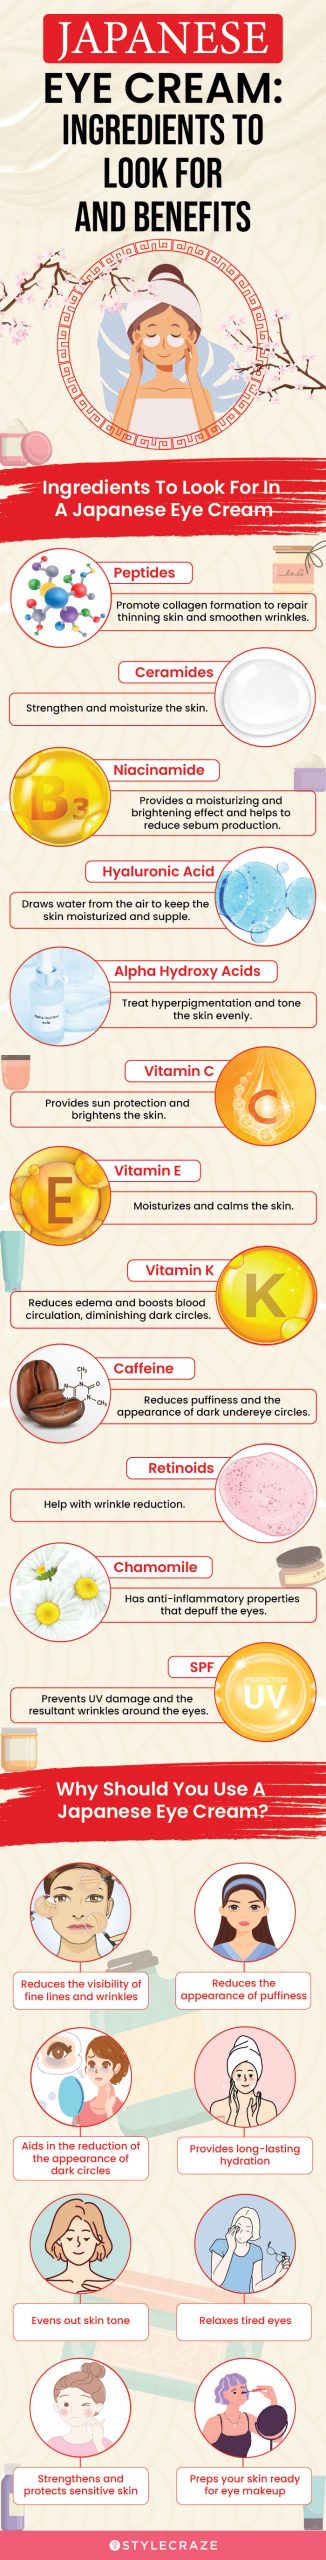 Japanese Eye Cream: Ingredients To Look For [infographic]